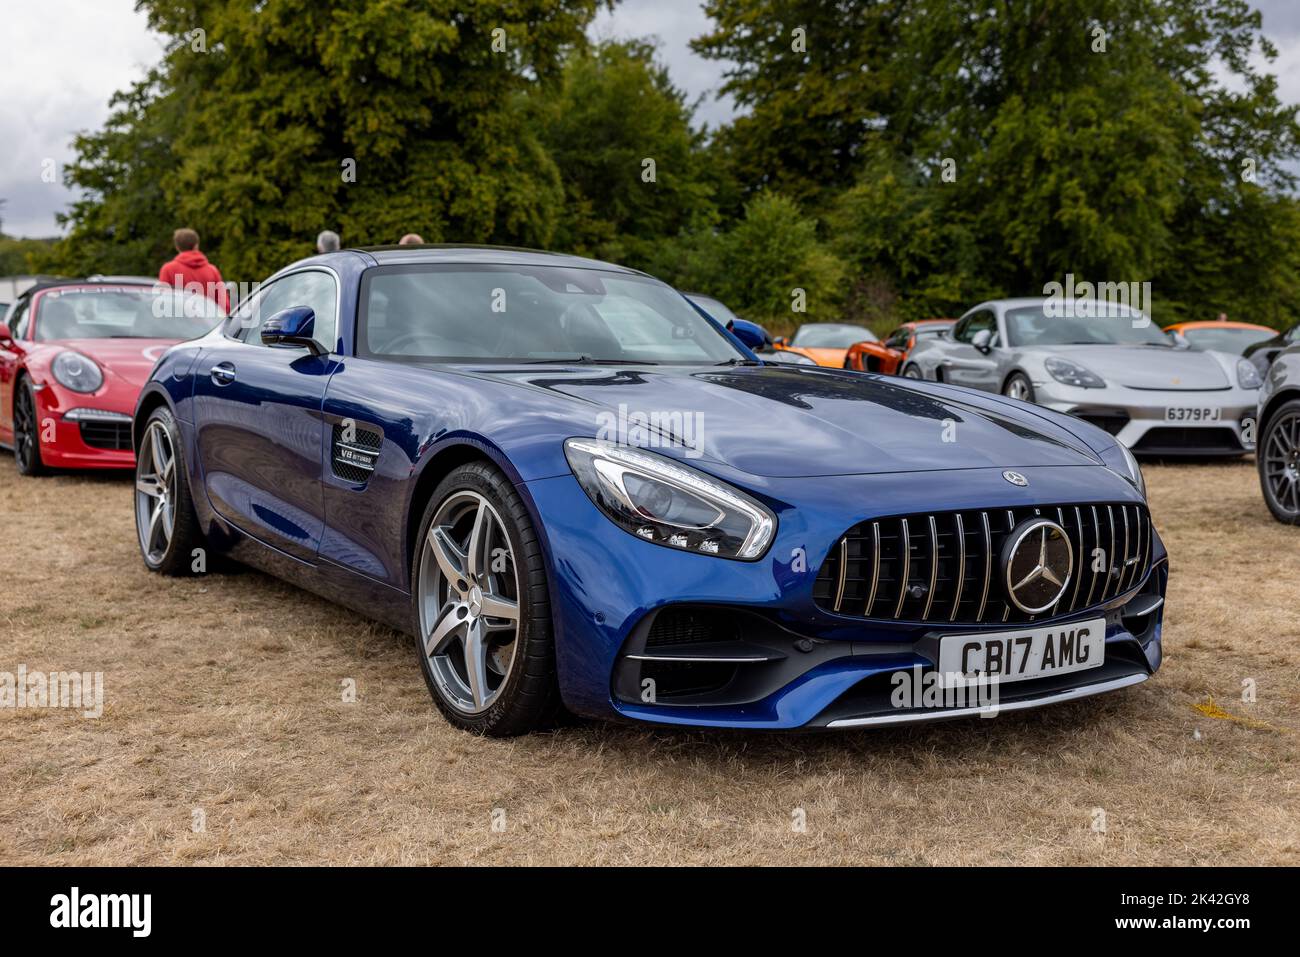 2017 Mercedes AMG GT, on display at the Supercar Club motor show held at Blenheim Palace Stock Photo